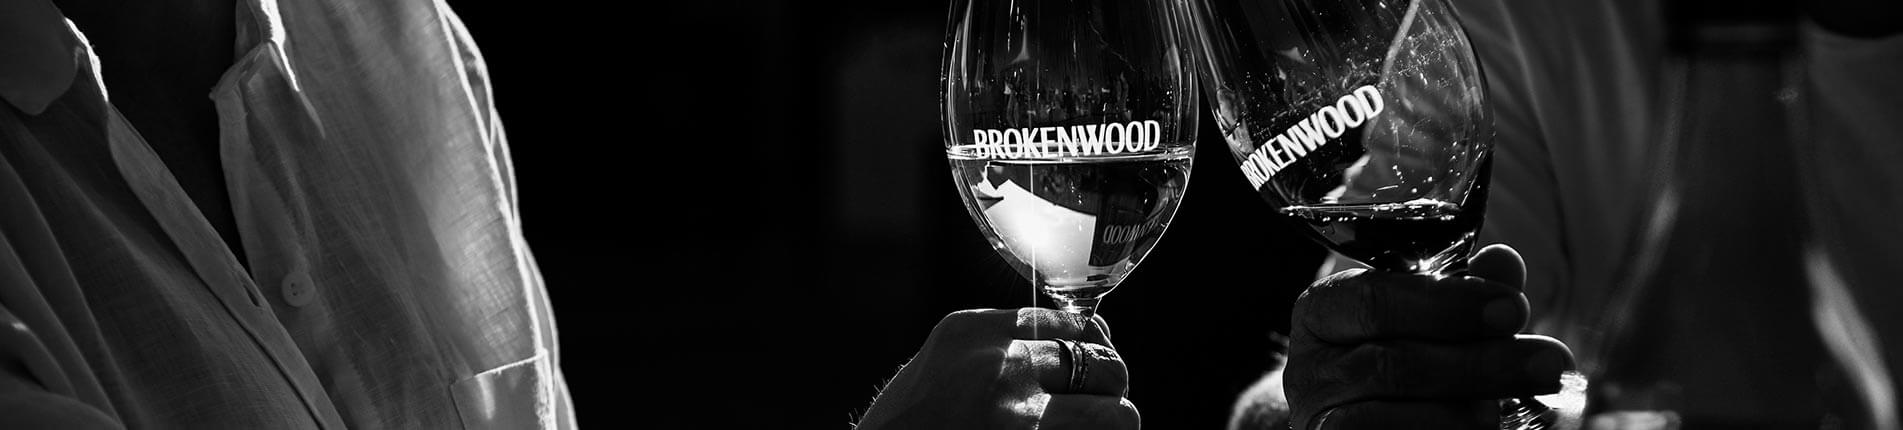 join our brokenwood wine club 